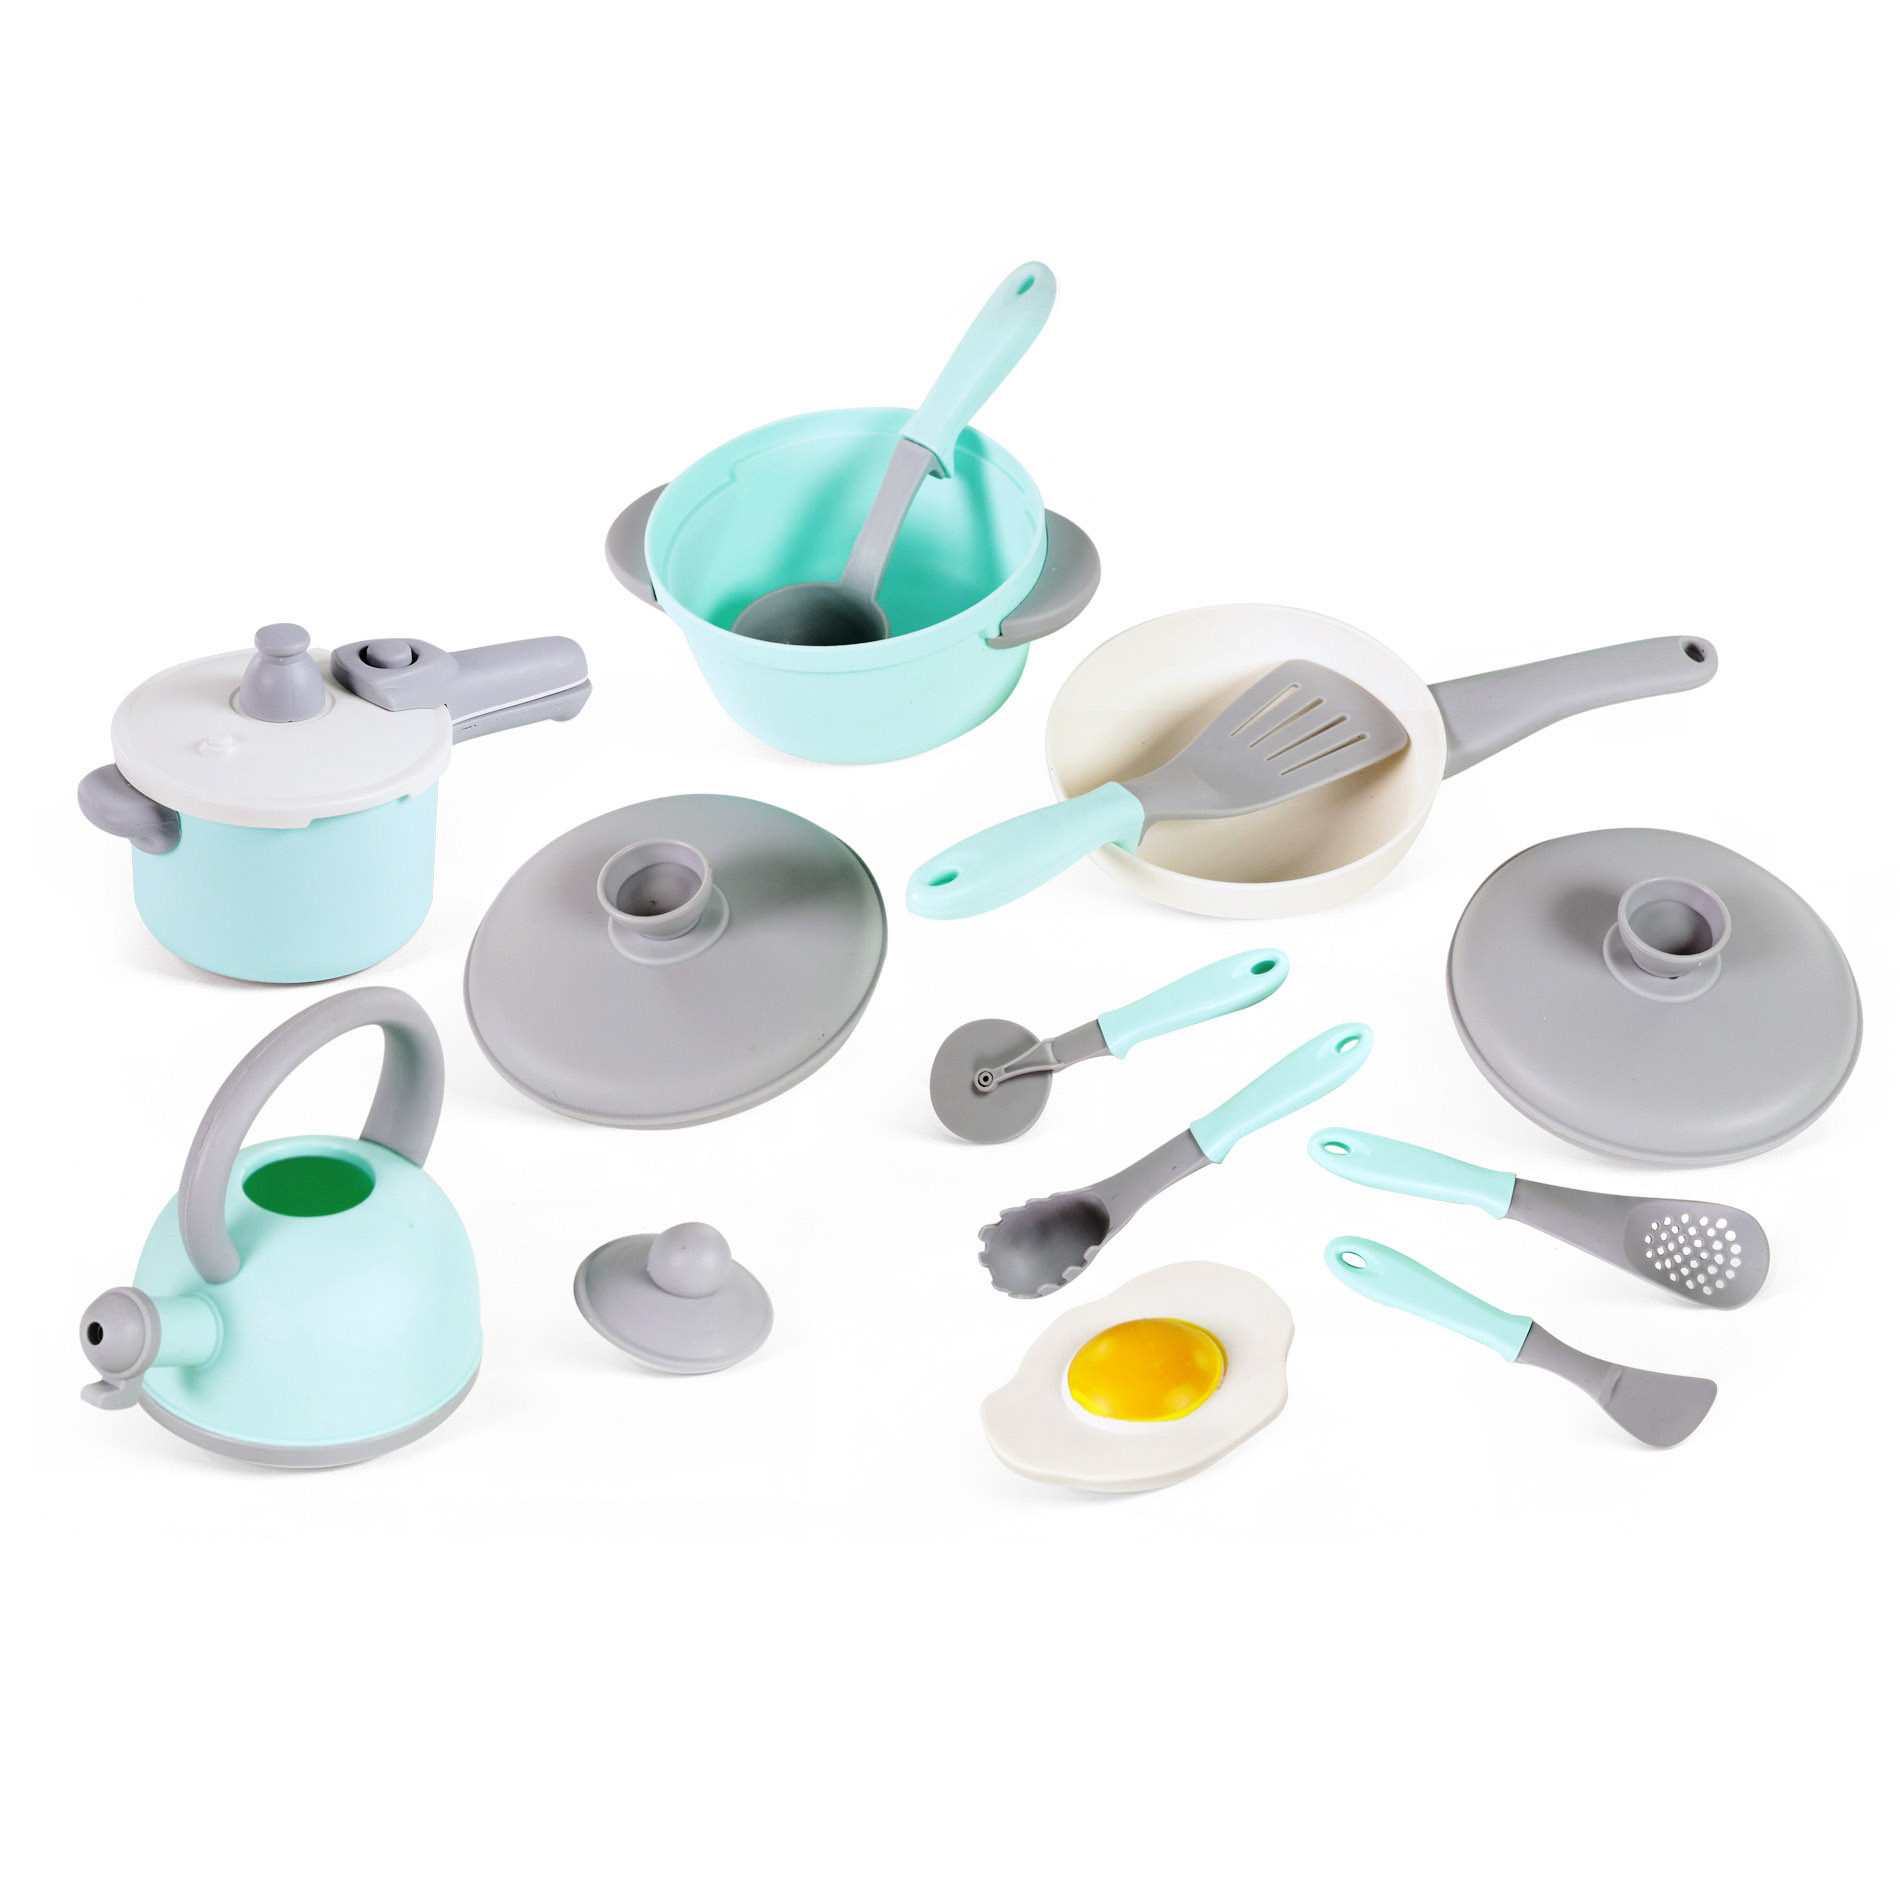 Kitchen set with dishes